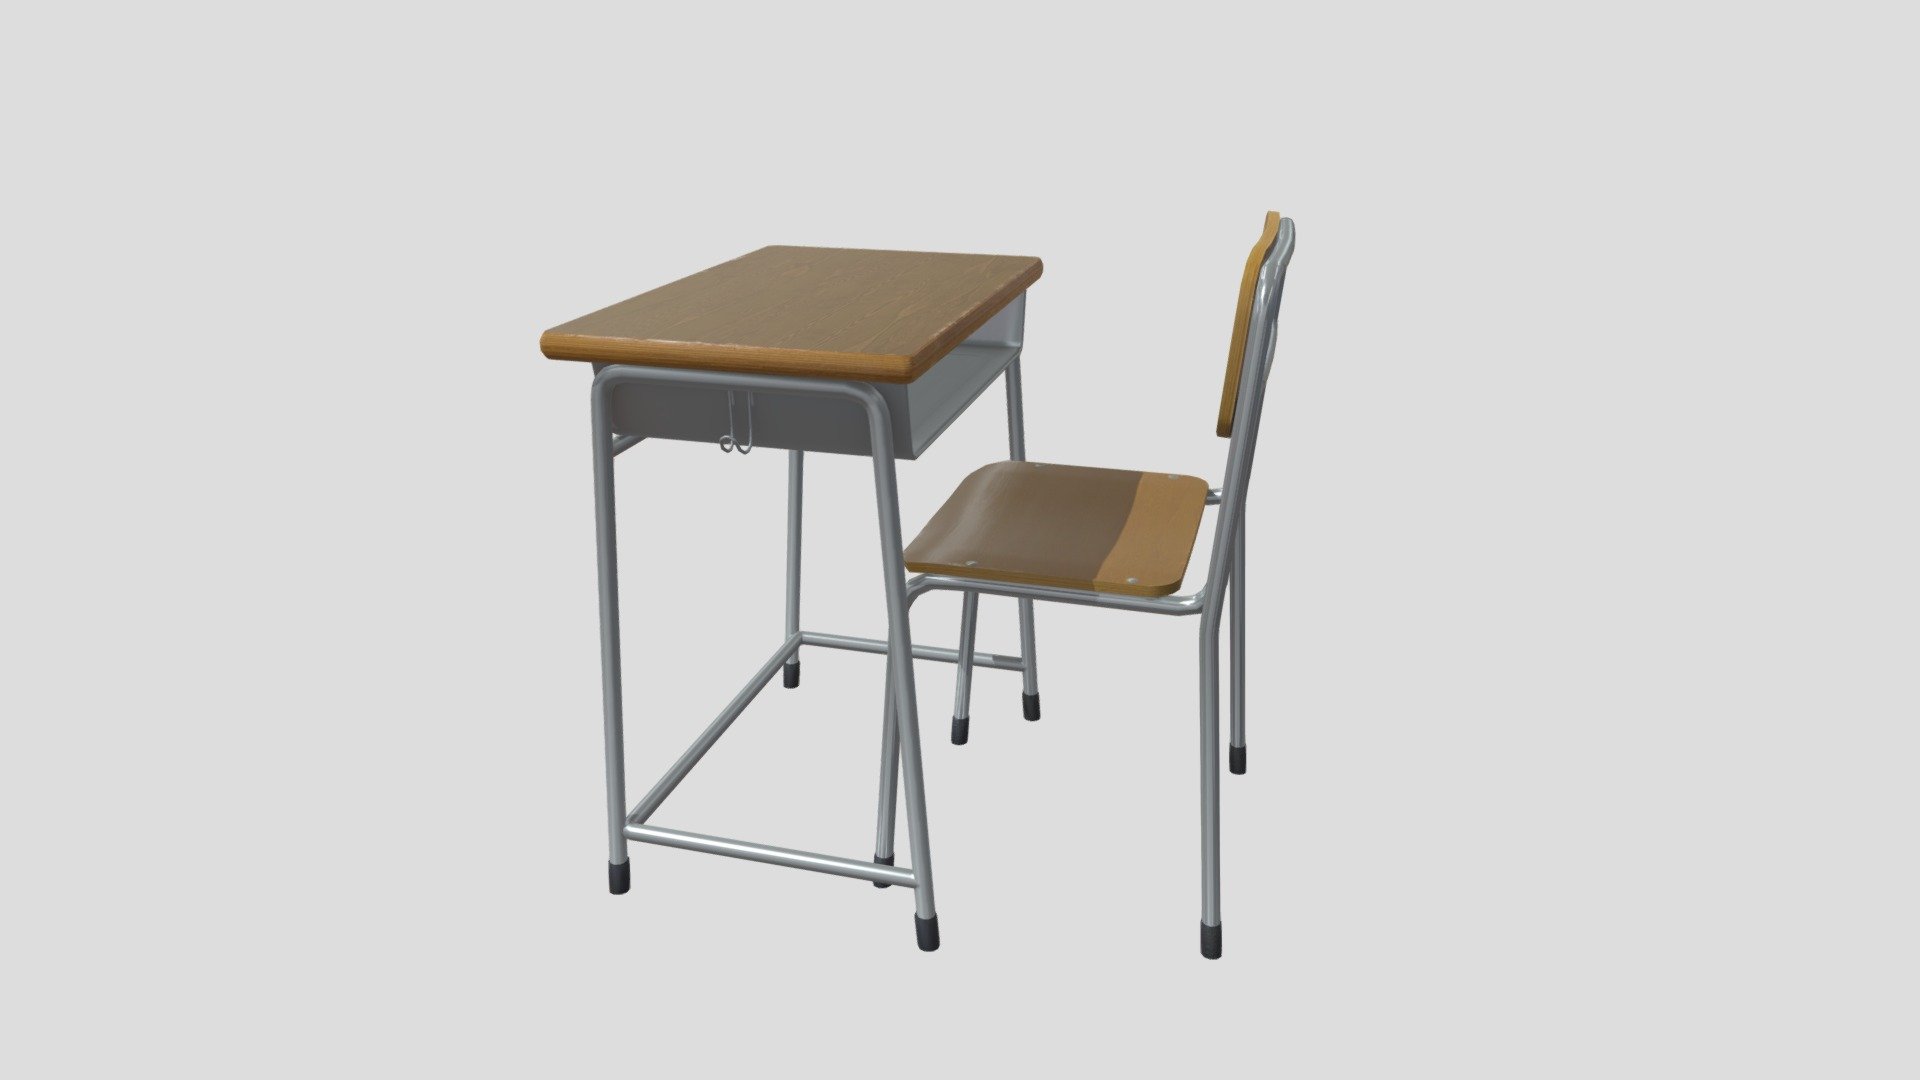 school desk and chair in classroom